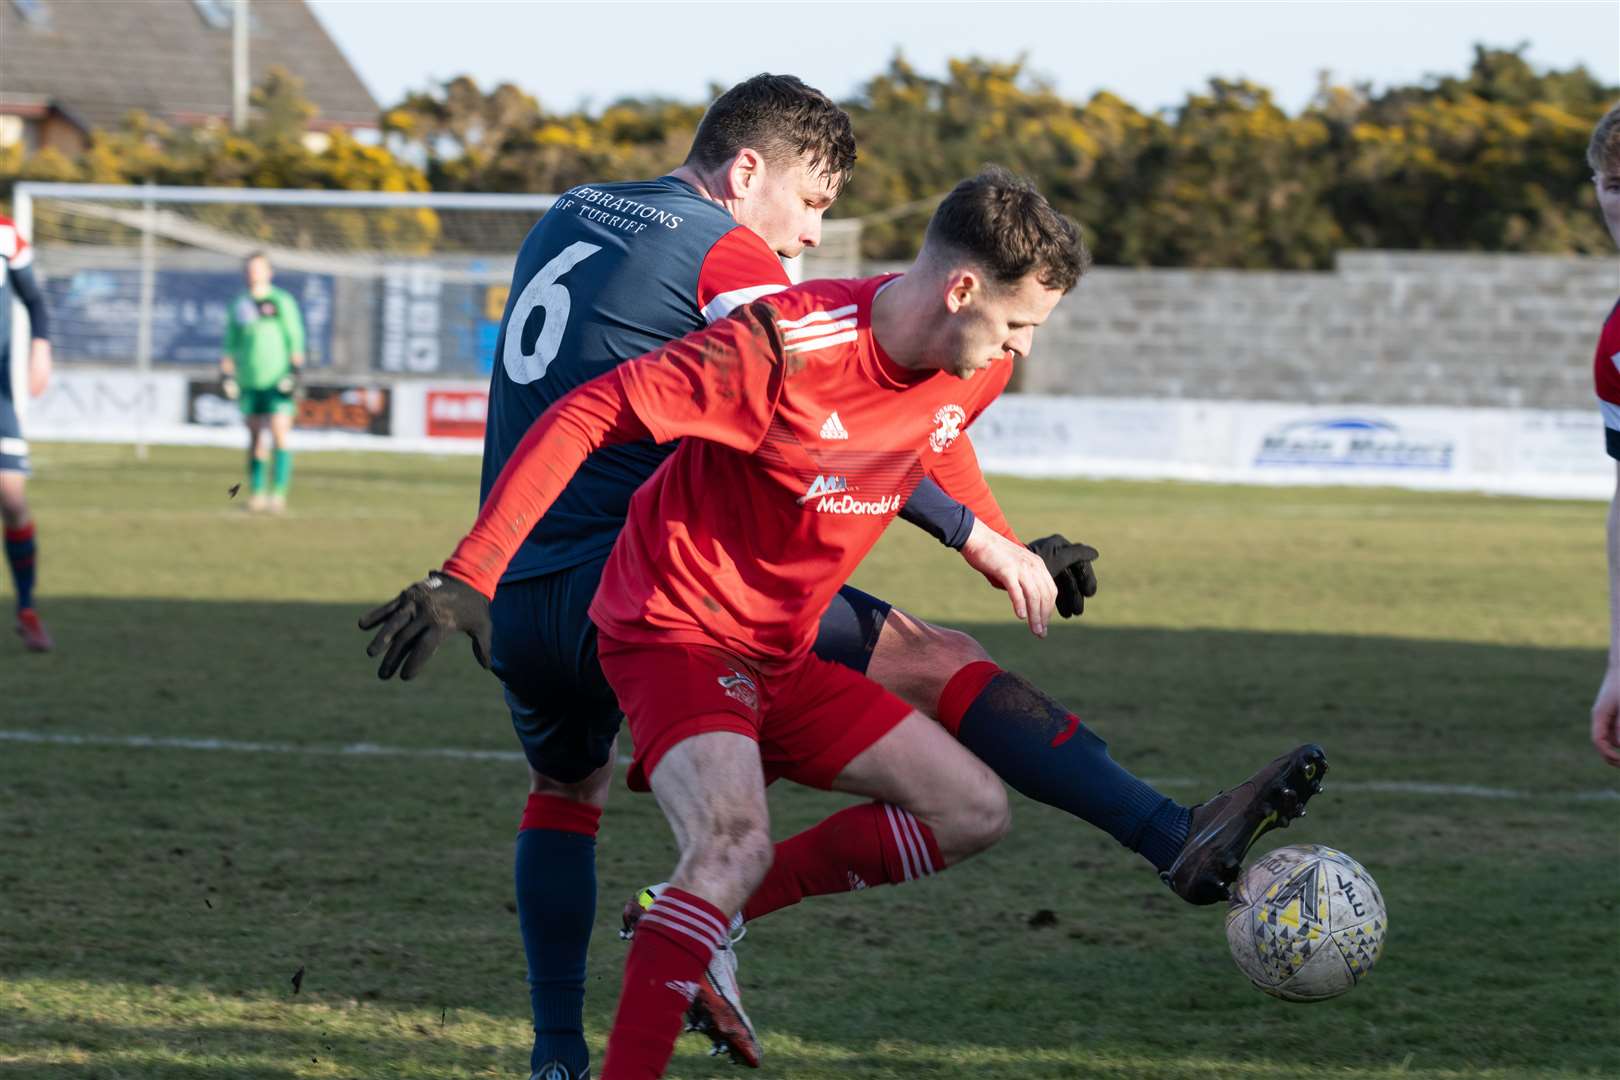 Ryan Farquhar netted twice for Lossiemouth. Picture: Beth Taylor.